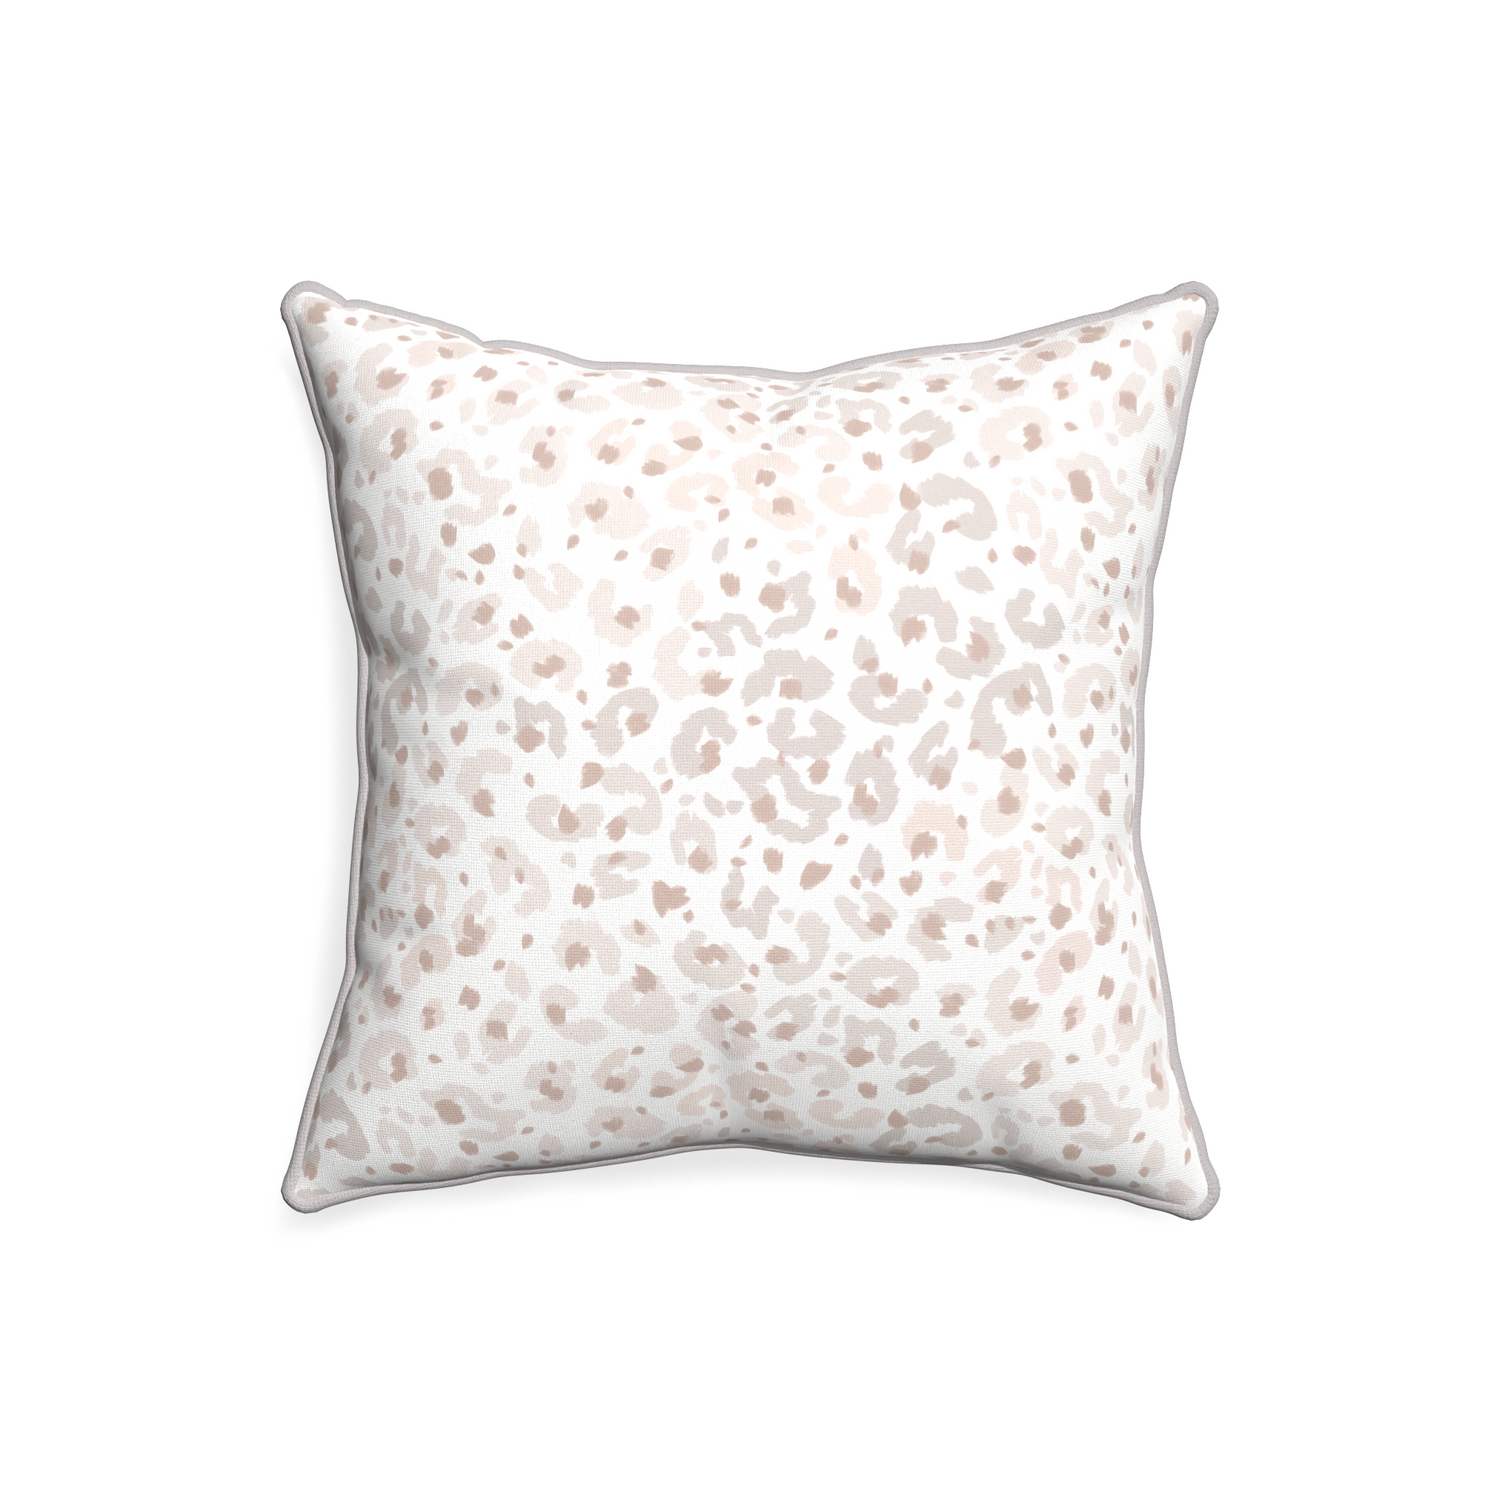 20-square rosie custom pillow with pebble piping on white background